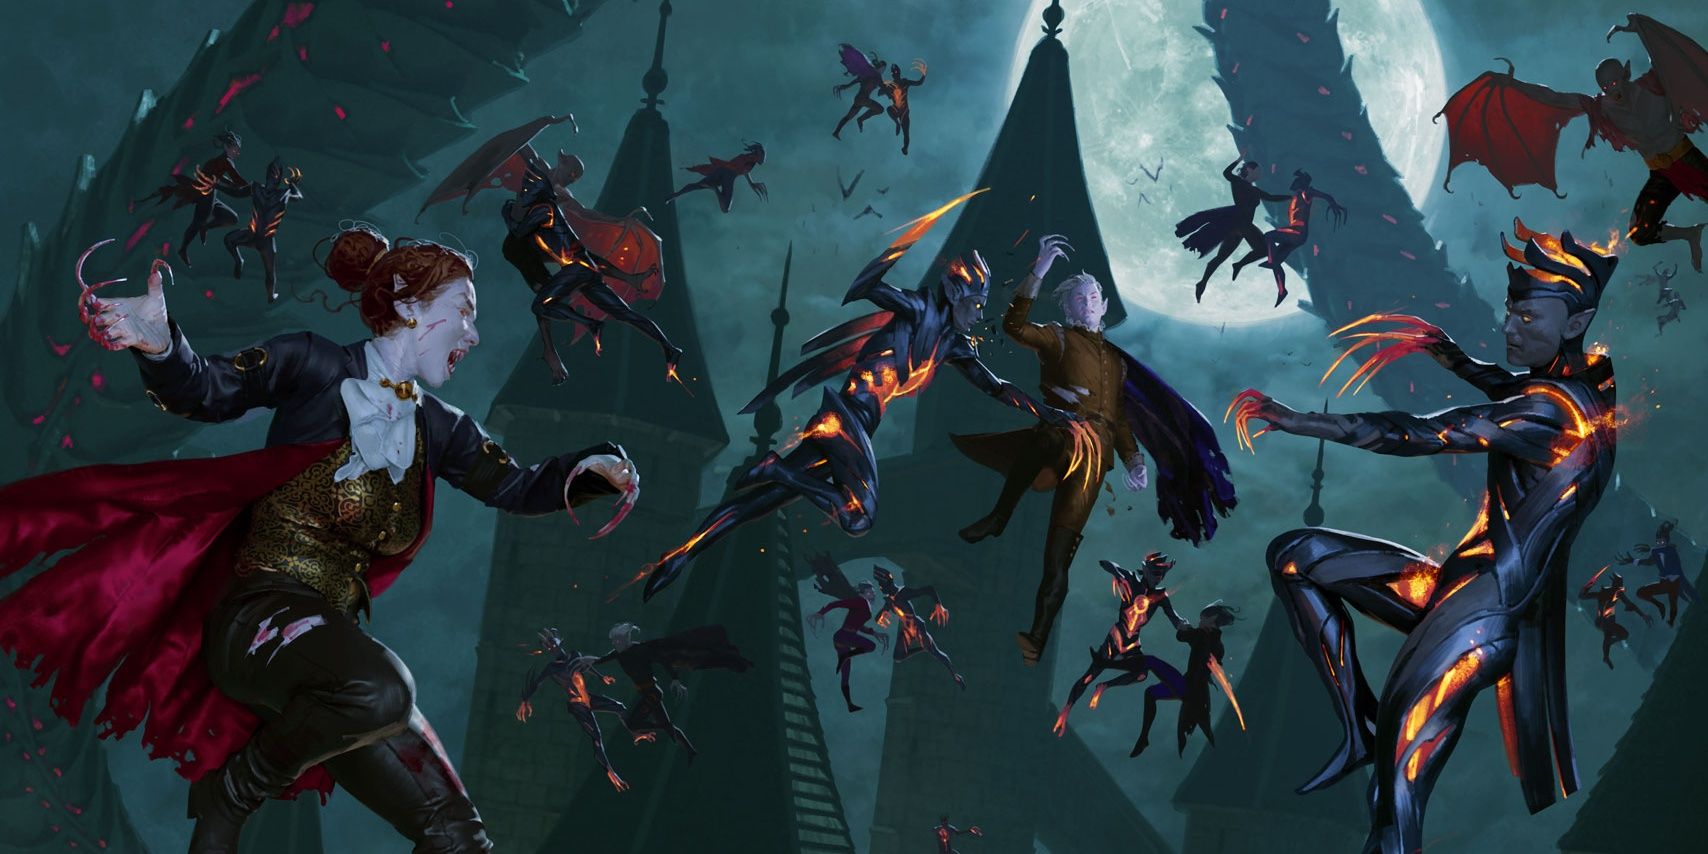 Vampires battle phyrexians mid air beyond castle and moon in Magic: The Gathering.